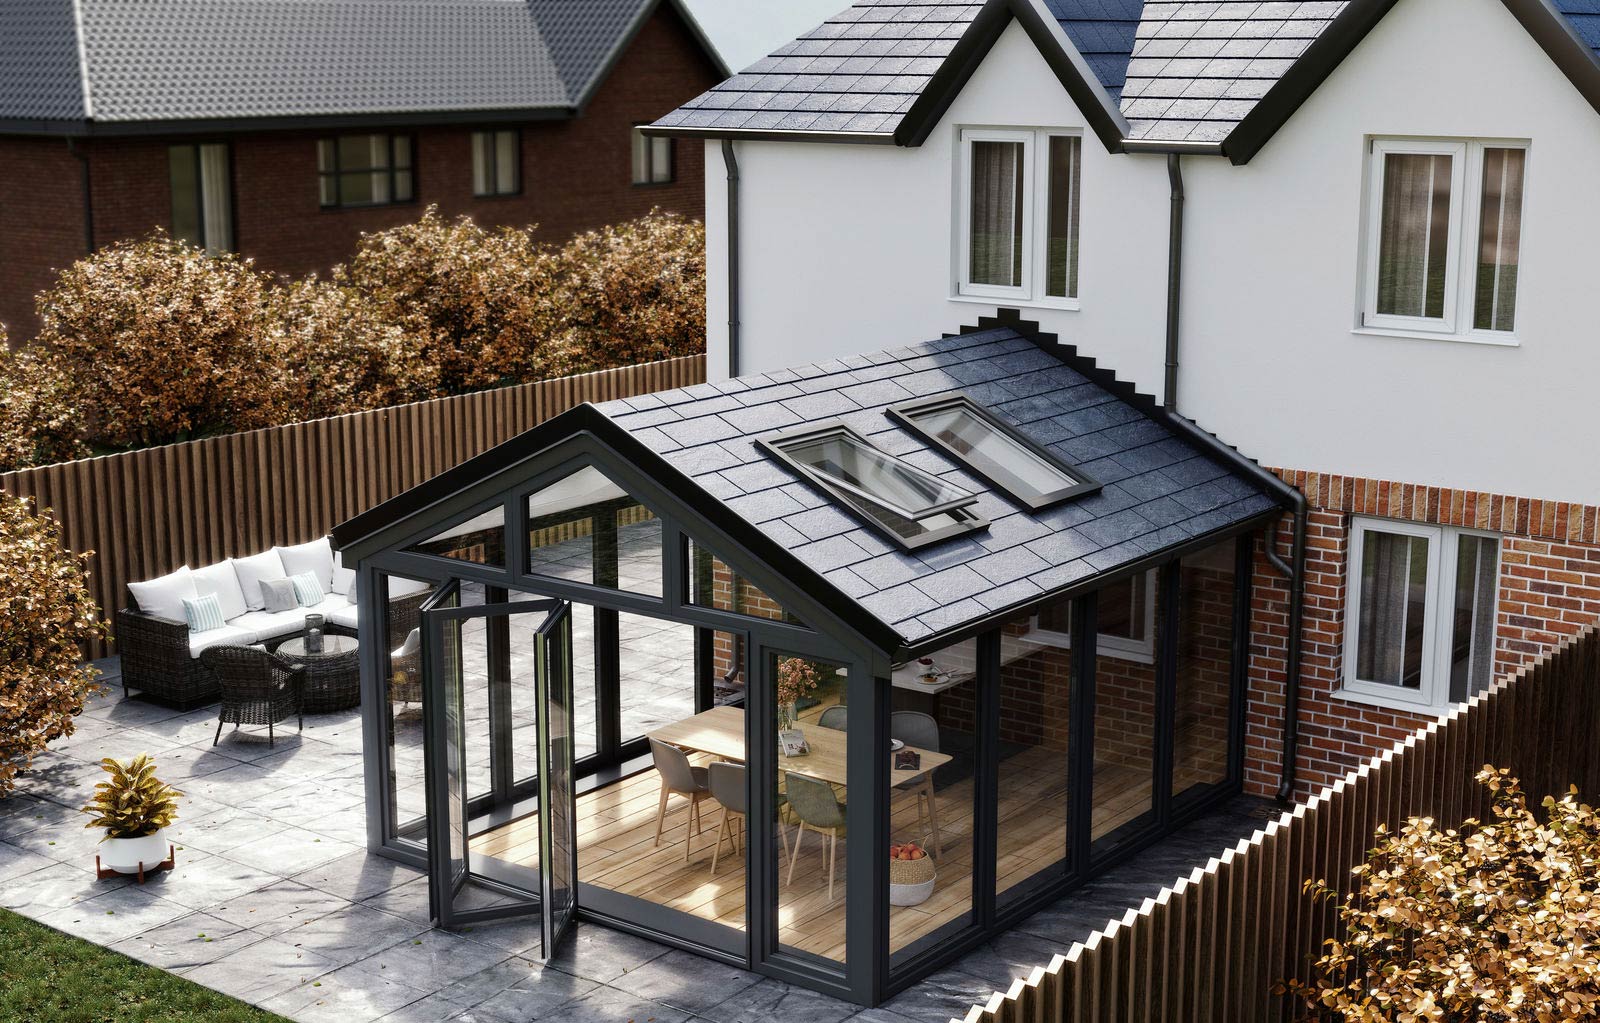 gable-end conservatories solihull